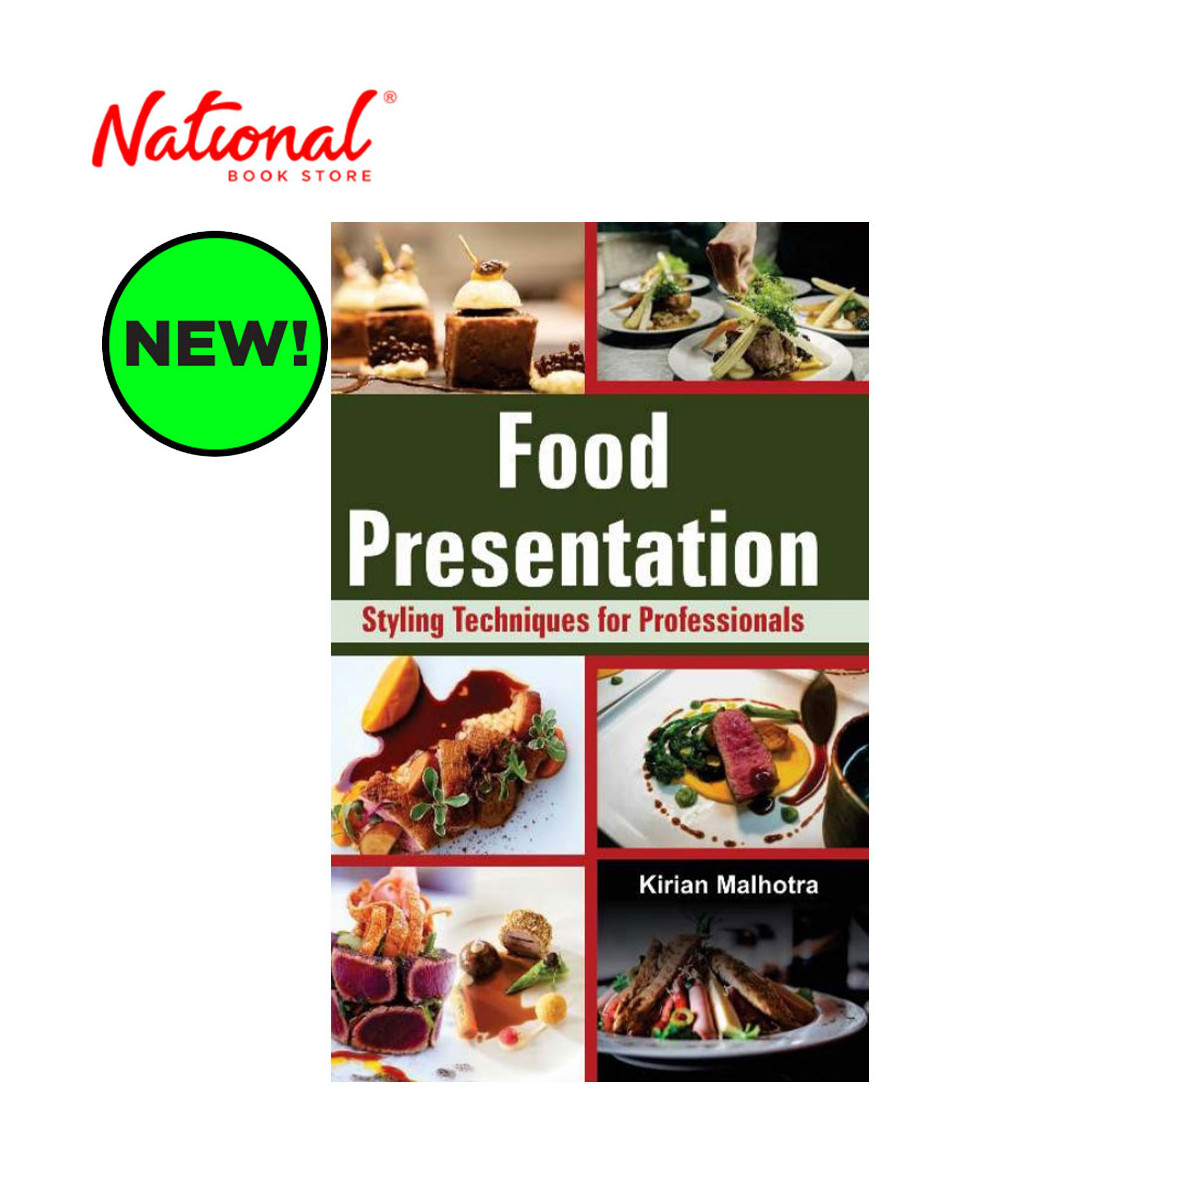 Food Presentation: Styling Techniques for Professionals by Kirian Malhotra - Trade Paperback